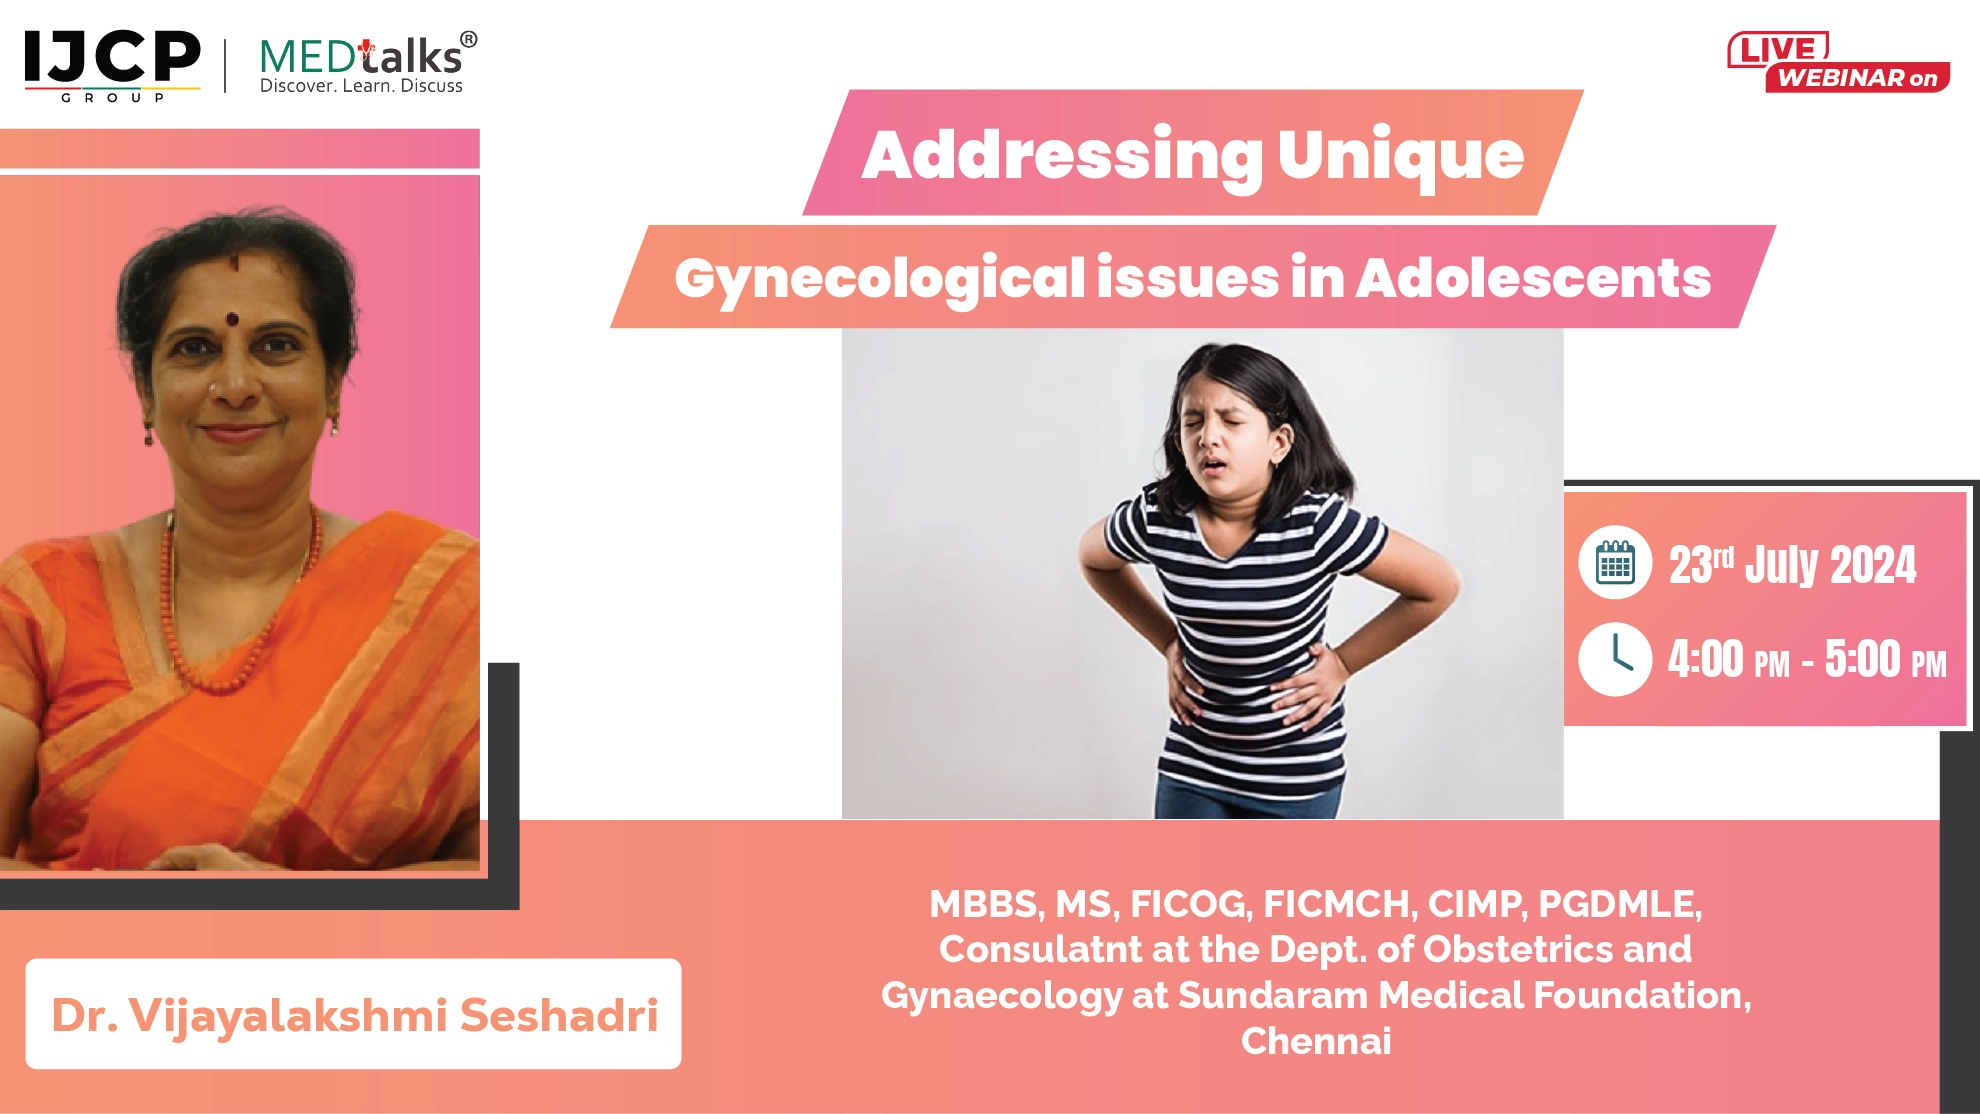 Addressing Unique Gynecological issues in Adolescents